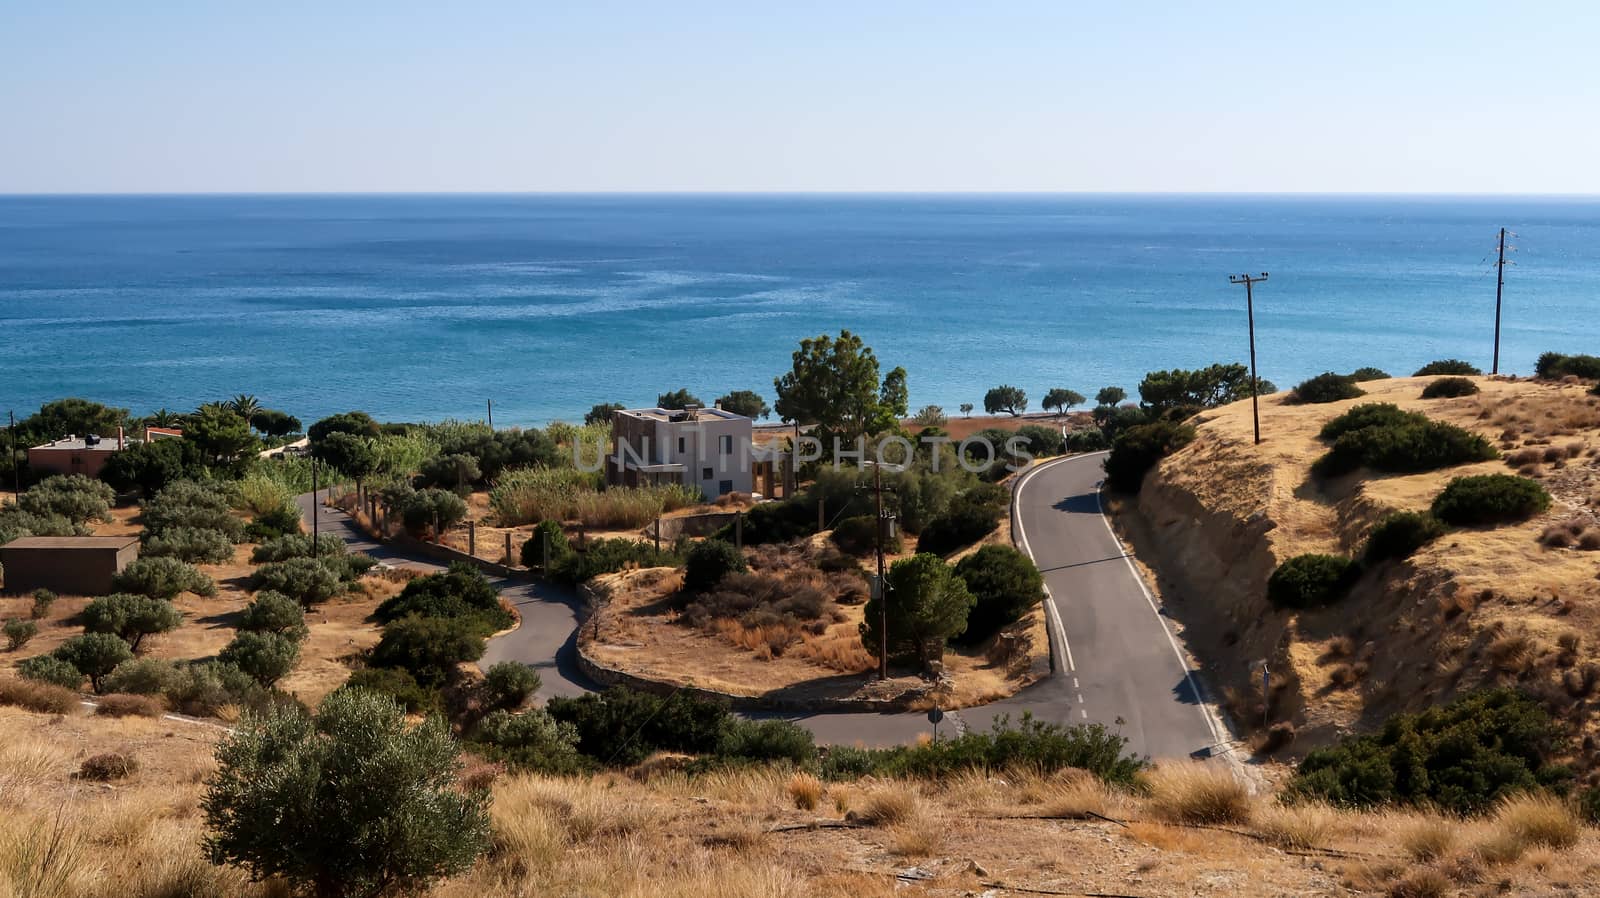 Bending road through the lands with olive trees and Libyan sea further away - Crete by codrinn